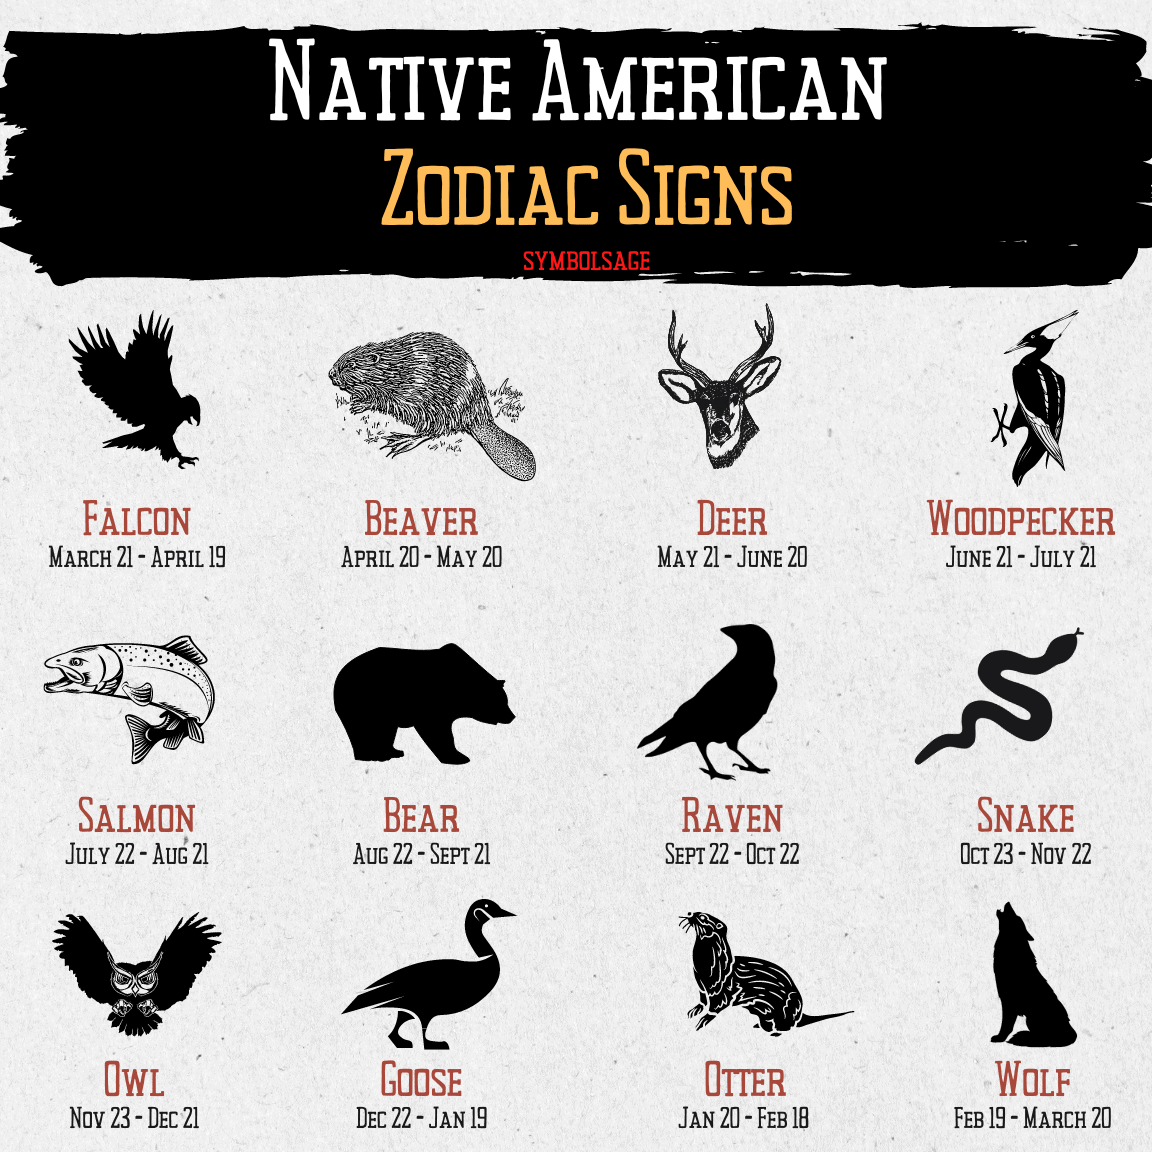 What is the 'Native American' Zodiac? - Symbol Sage